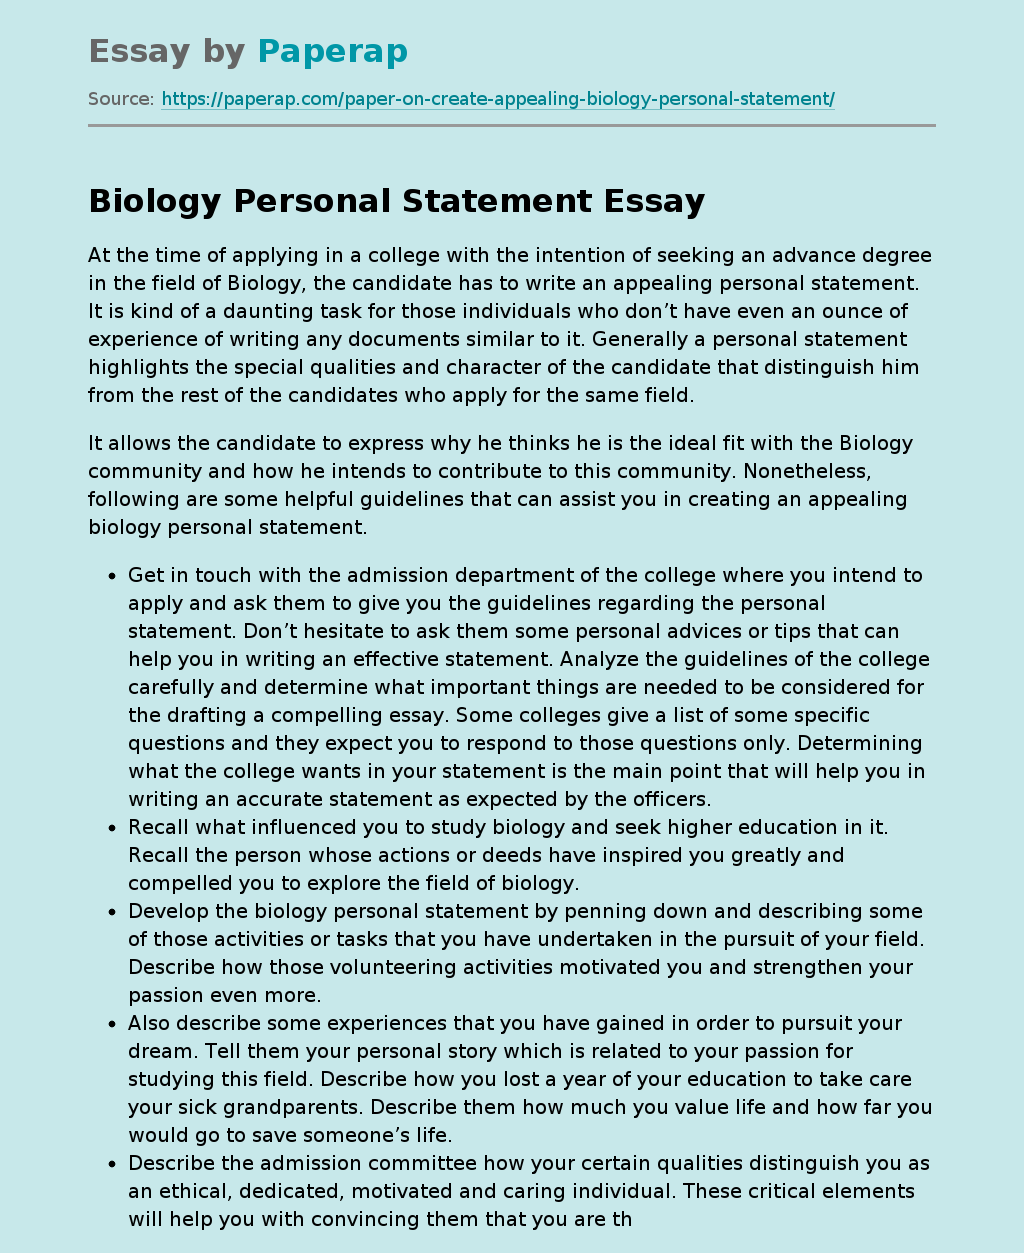 biological and biomedical sciences personal statement